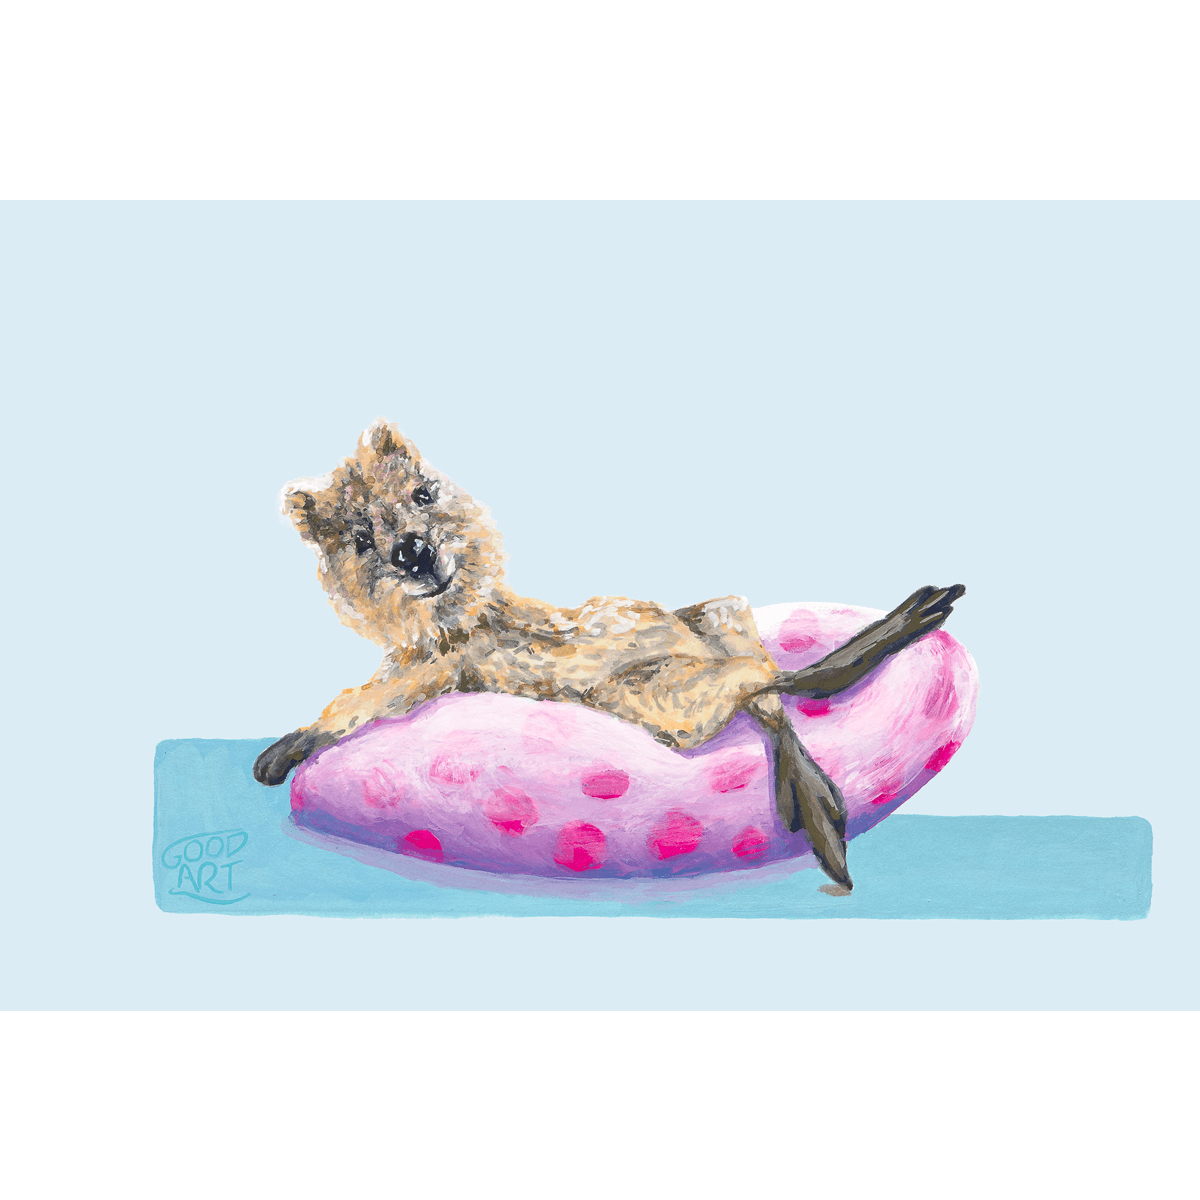 An art print of a Rottnest Island quokka reclining on a pool doughnut, whilst dipping her toe into the sea. Pink and purple spotted doughnut. Good Art print.